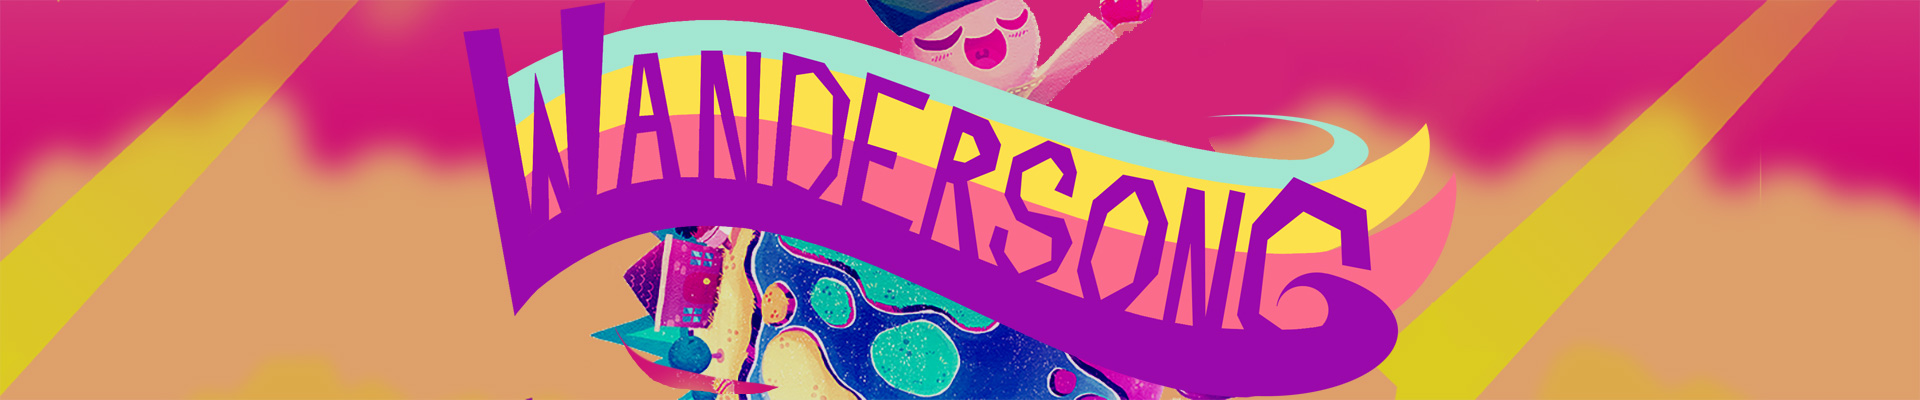 Thoughts on: Wandersong